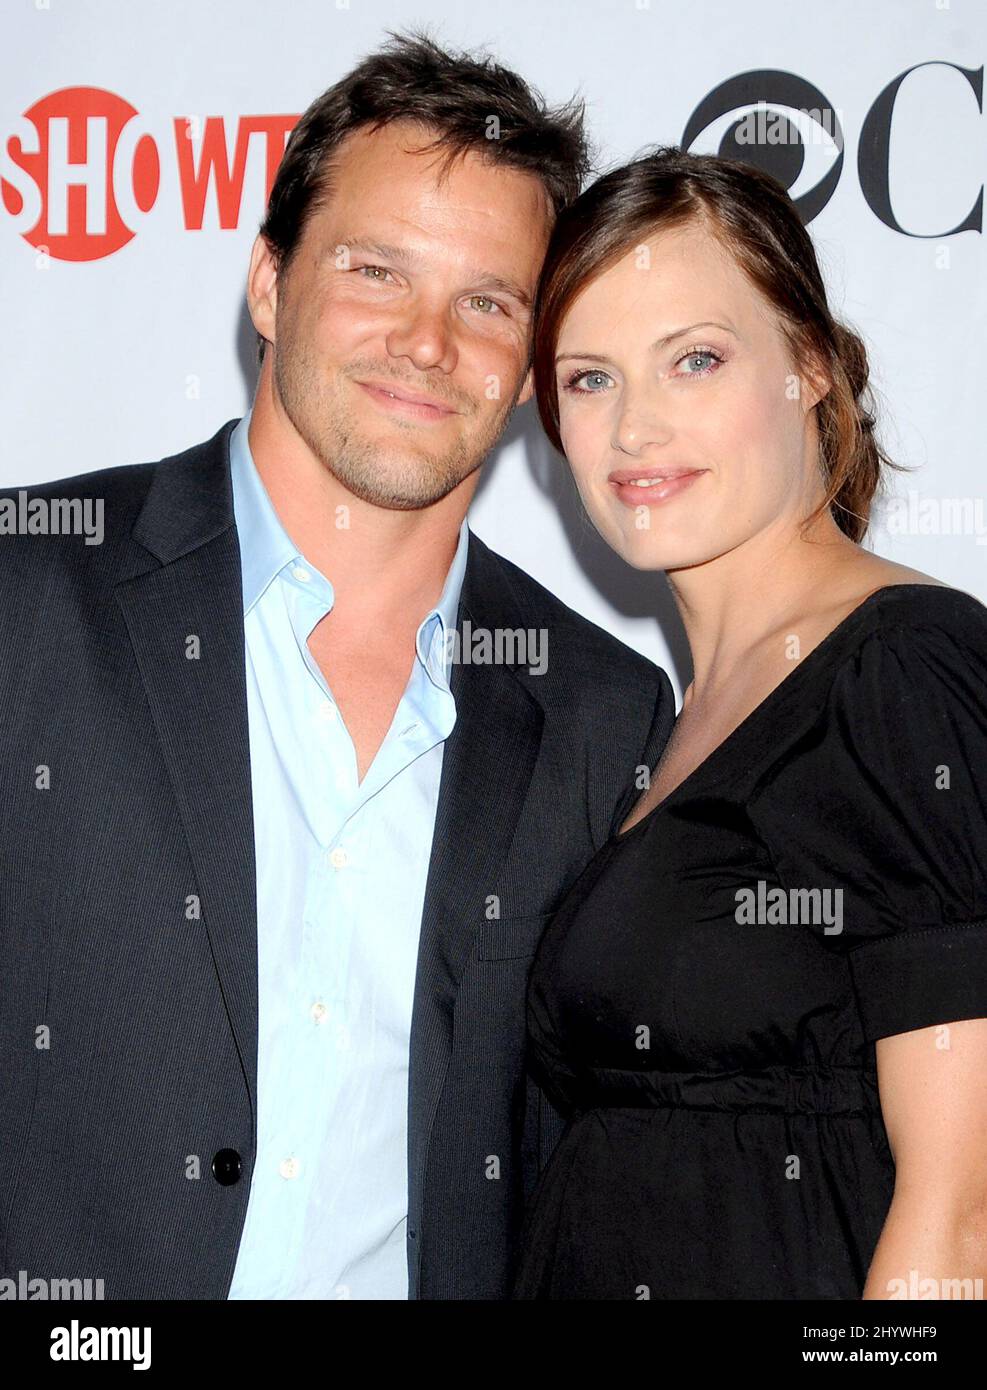 Dylan Bruno and Emmeli Hultquist arriving to the .Summer 2009 TCA Party-CBS-SHOWTIME-CW, Huntington Library, Pasadena, California. Stock Photo